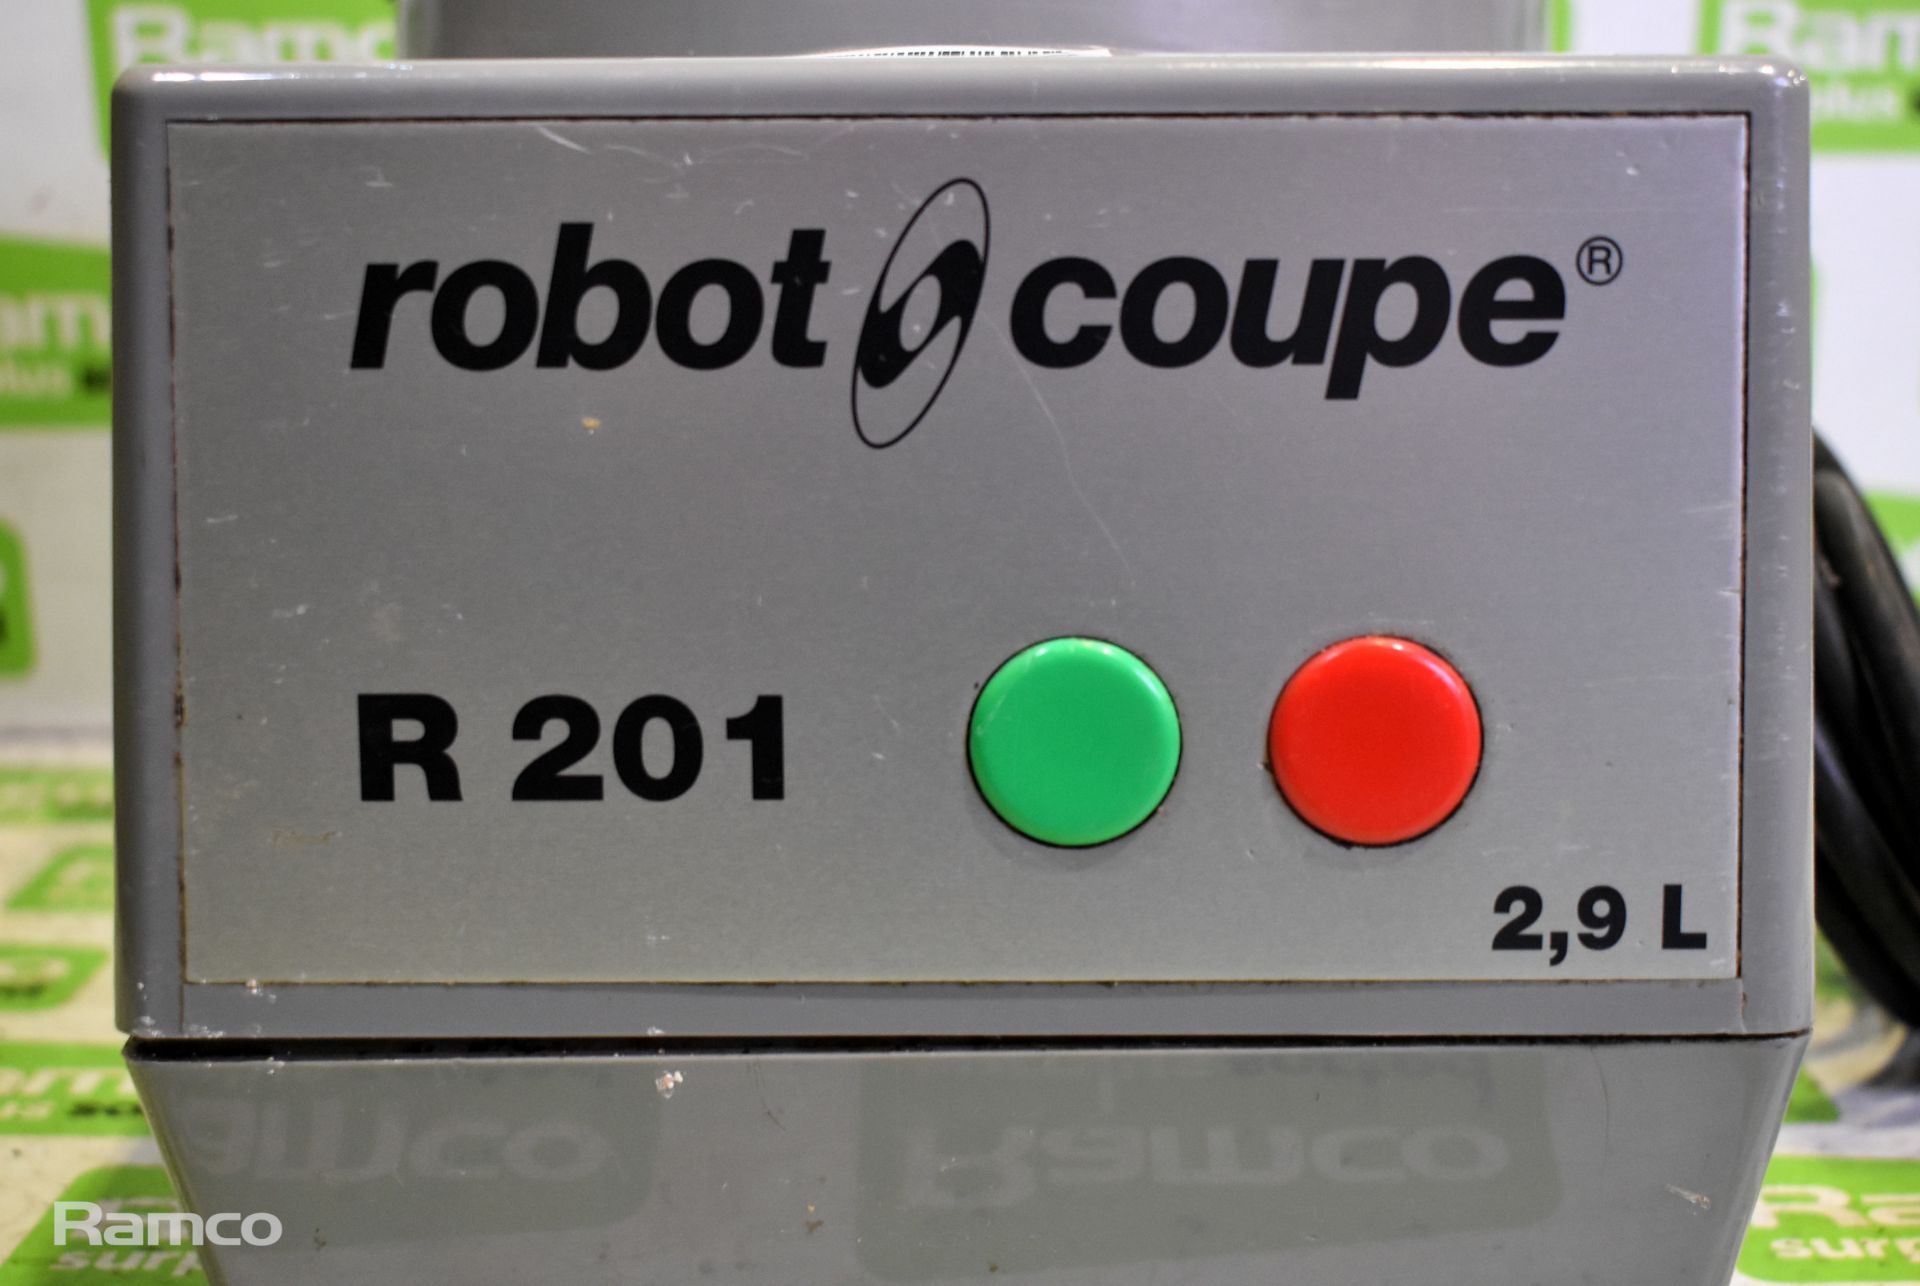 Robot-Coupe R201 electric food processor body - W200 x D 280 x H 250 mm - DAMAGED - Image 2 of 7